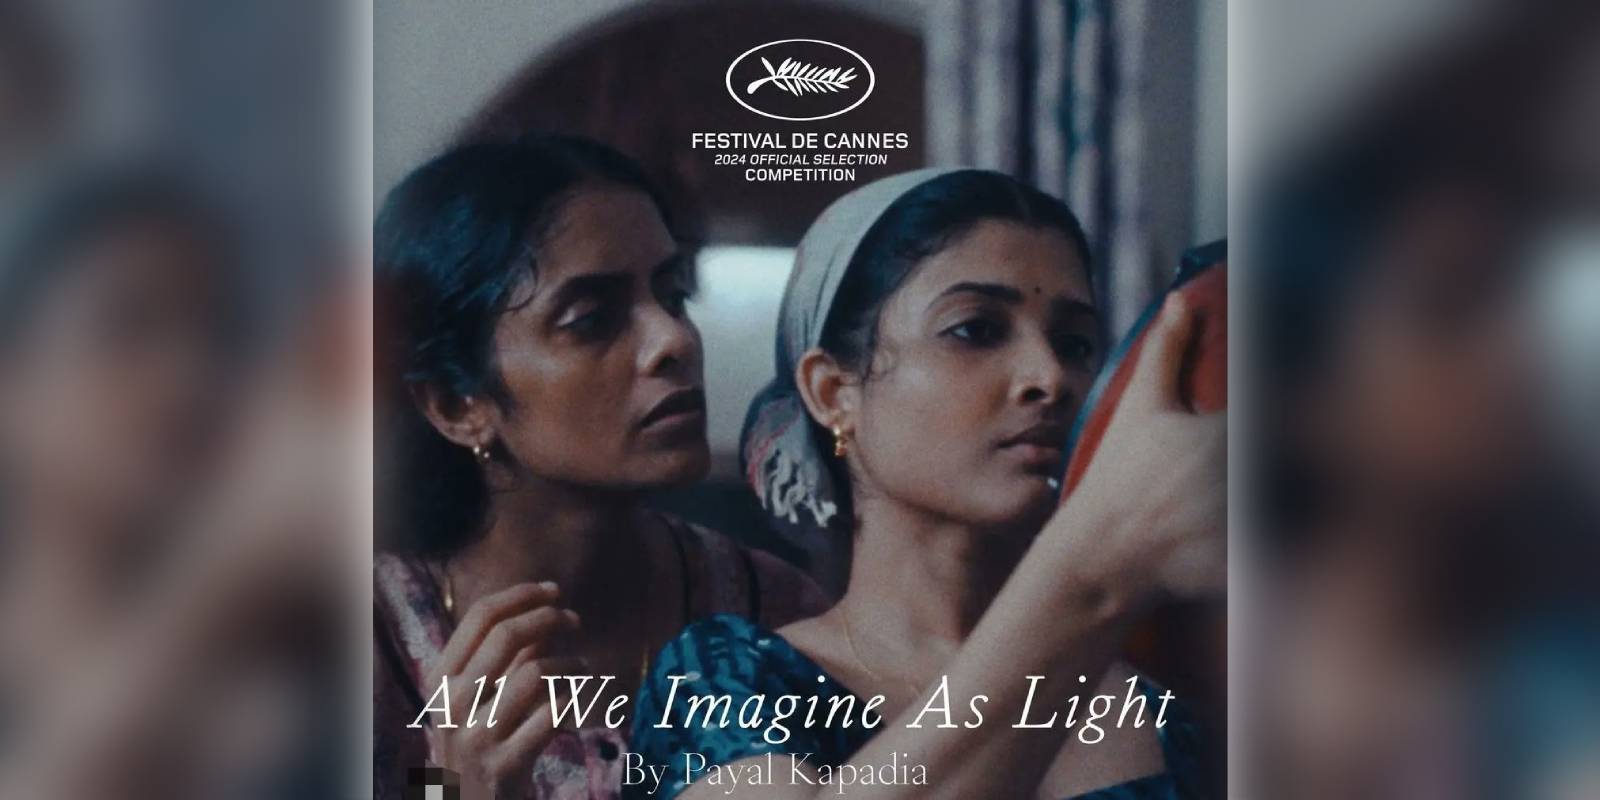 A poster of the film All We Imagine As Light